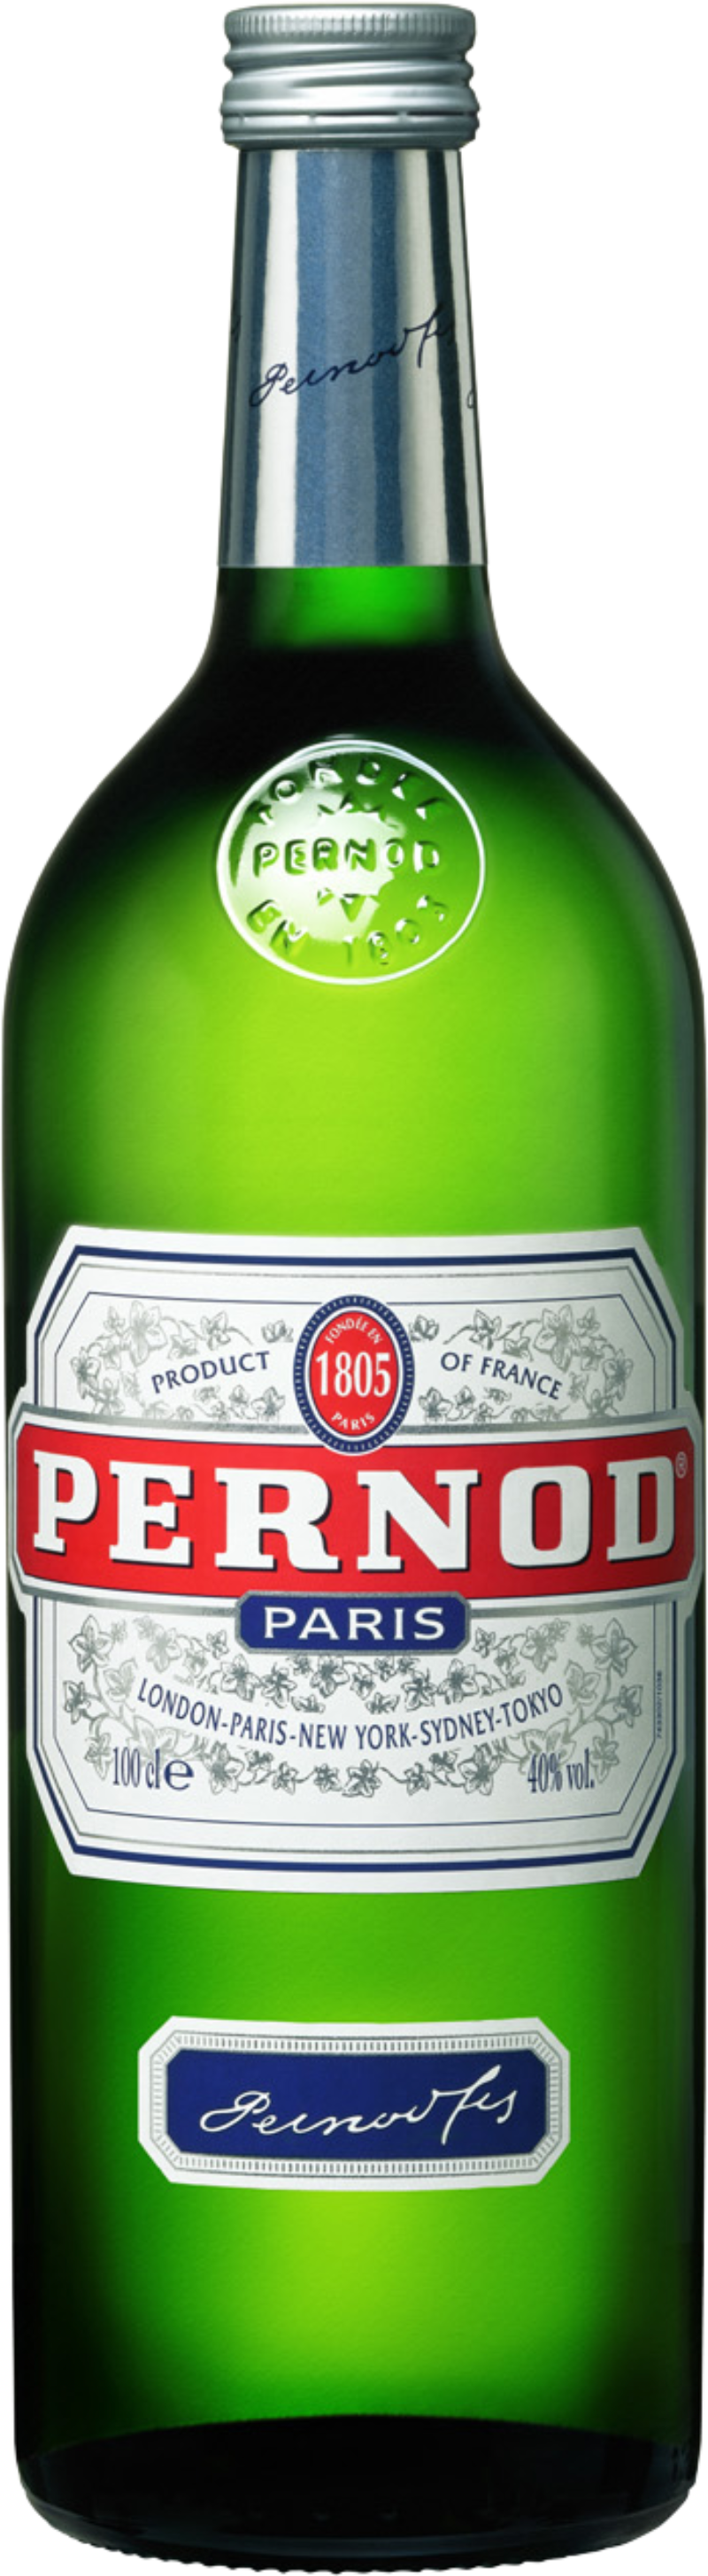 Pernod - Anise 100 cl 40% vol